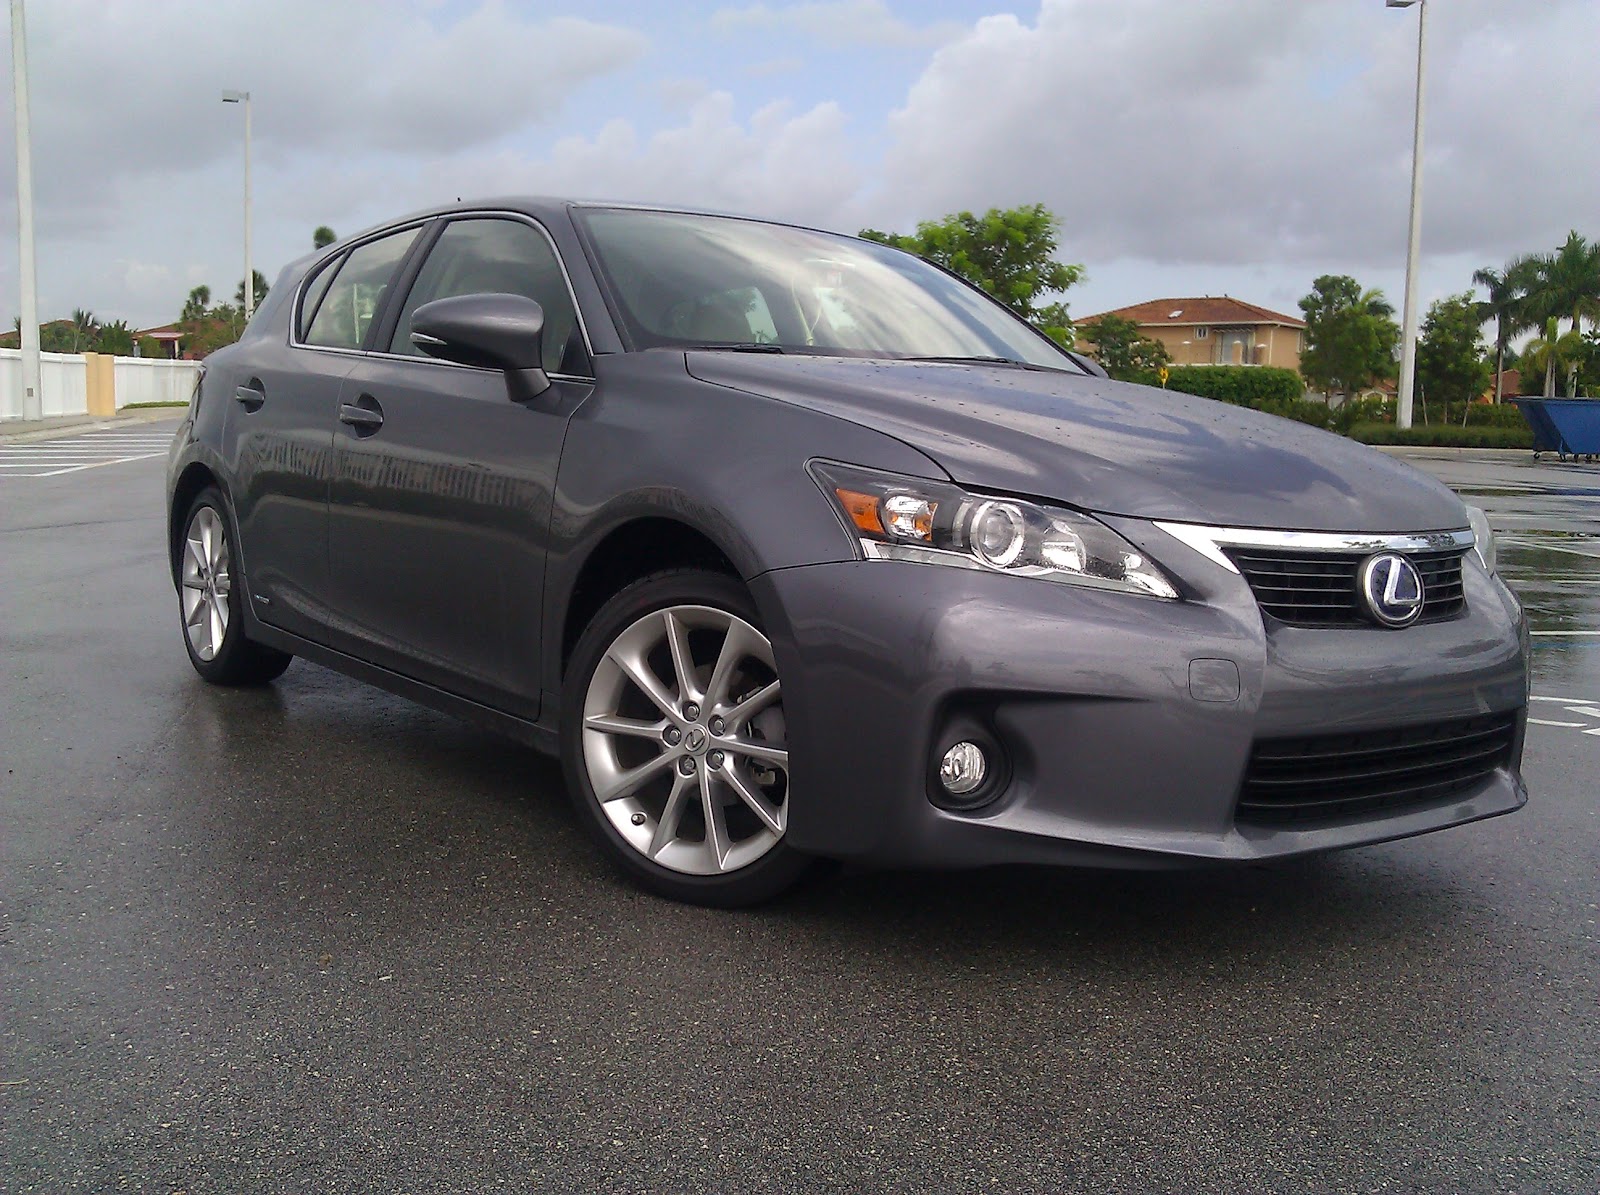 2012 Lexus CT200h Check out my review here http